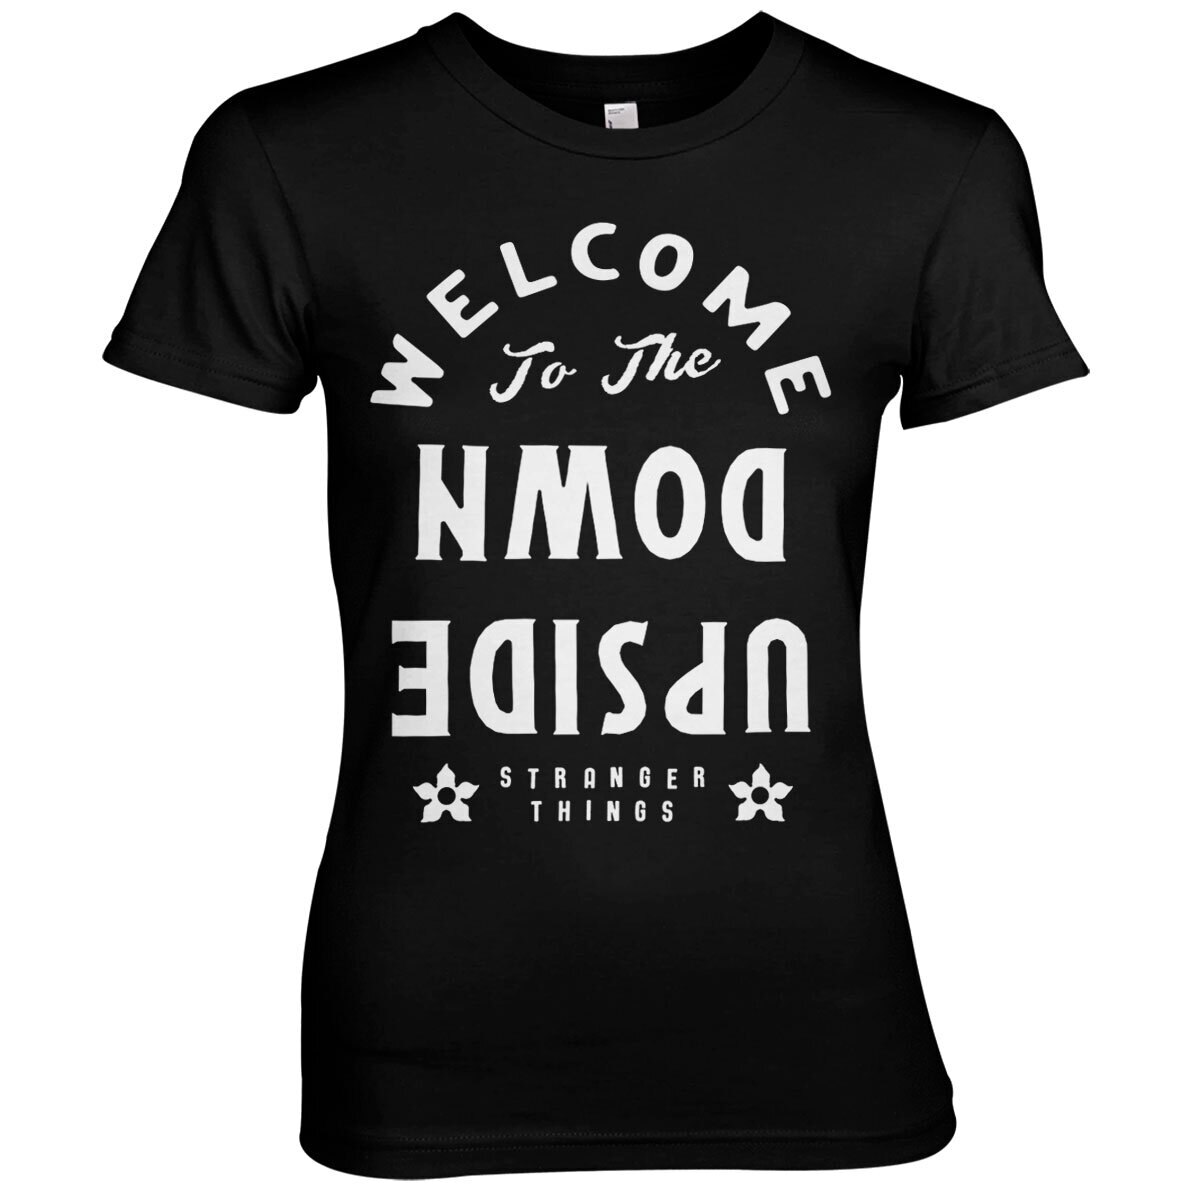 Welcome To The Upside Down Girly Tee